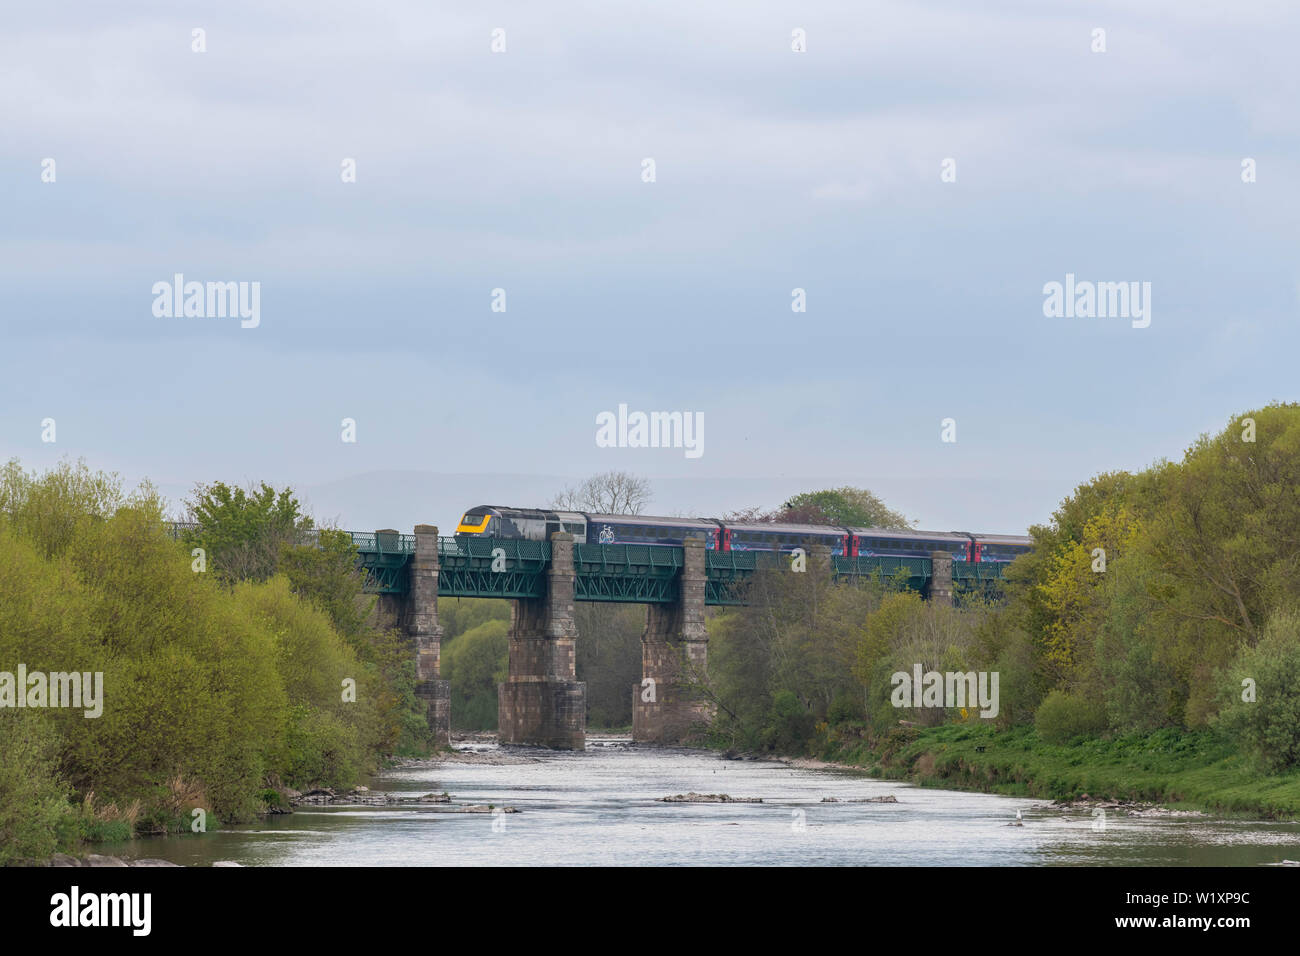 A Scotrail 'Inter7City' HST (High Speed Train) with an Image of a Bicycle on Its Side Crossing the River North Esk at Marykirk Stock Photo